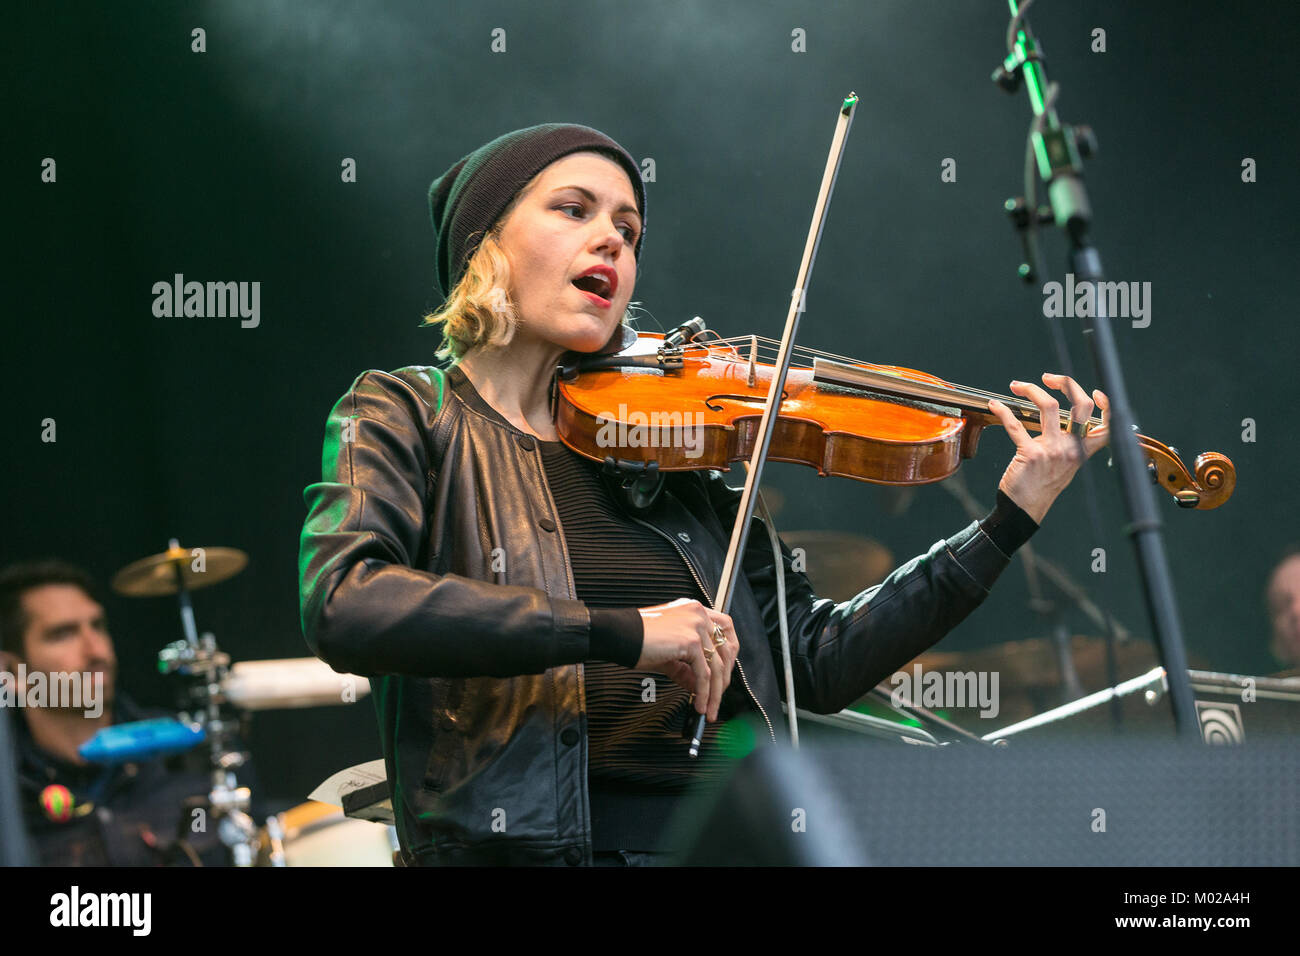 The American indie rock band Modest Mouse performs a live concert at the Norwegian music festival Piknik i Parken in Oslo. Here musician Lisa Molinaro on violin is pictured live on stage. Norway, 28/06 2015. Stock Photo